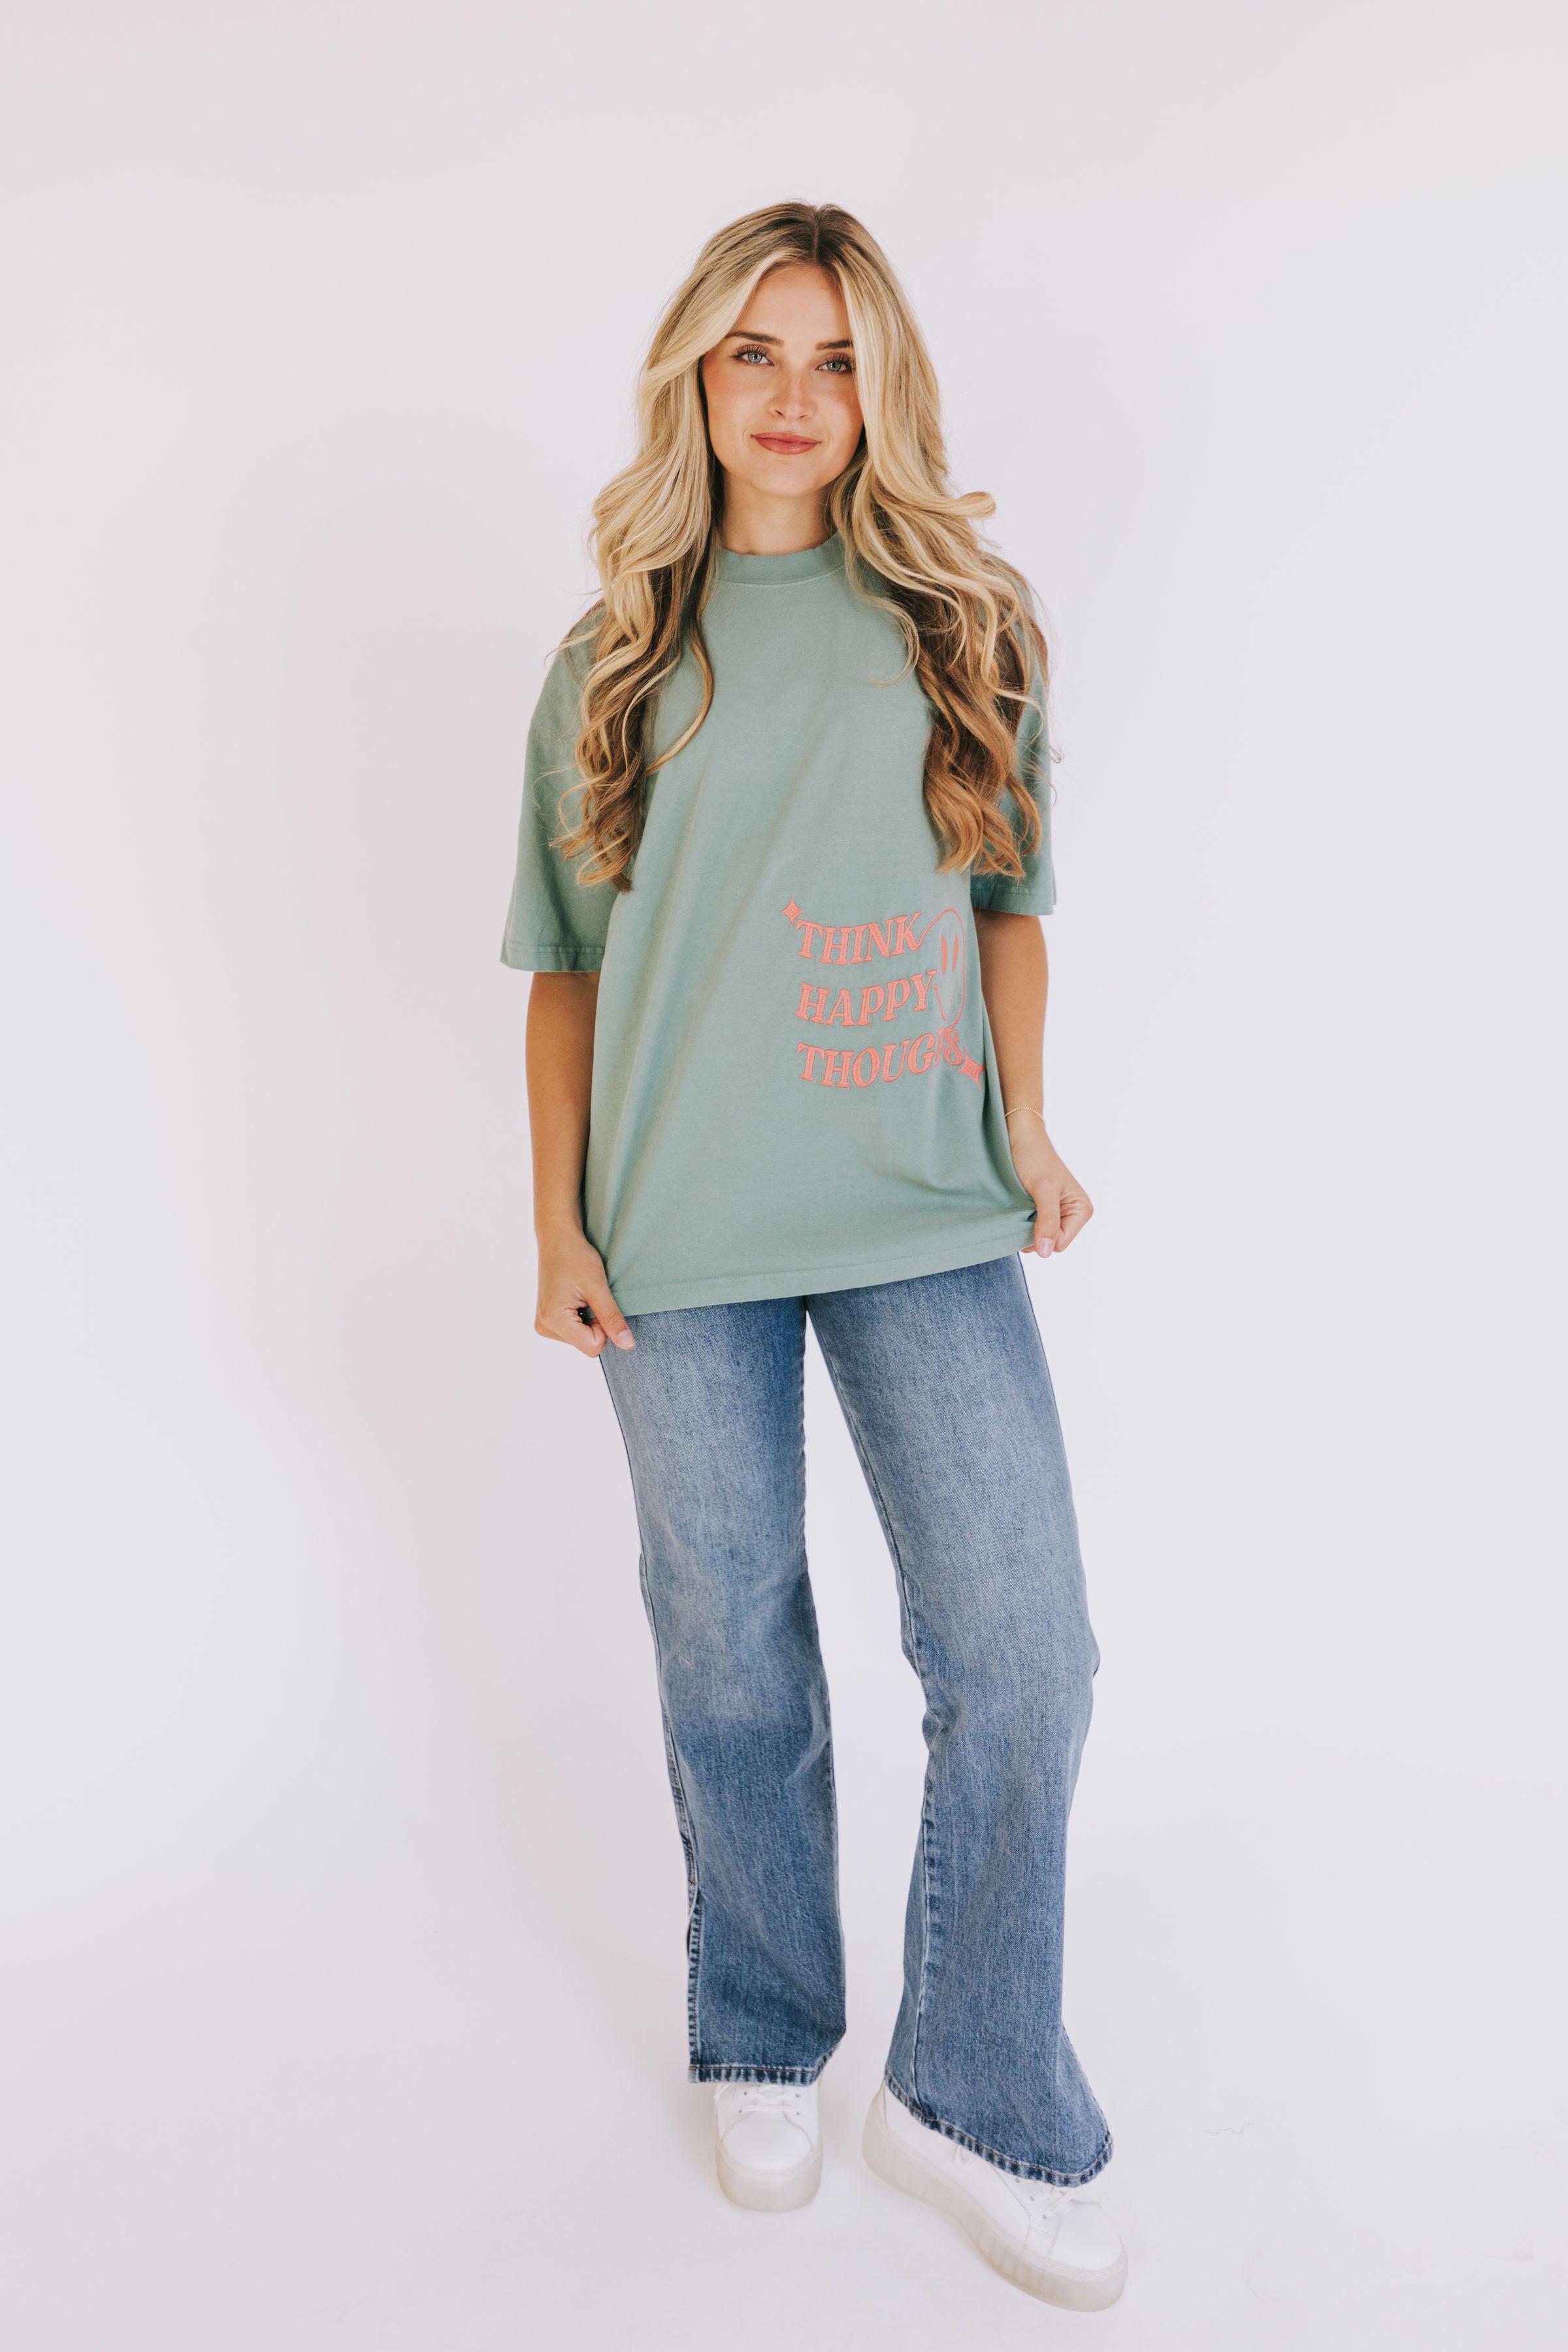 Think Happy Thoughts Graphic Tee